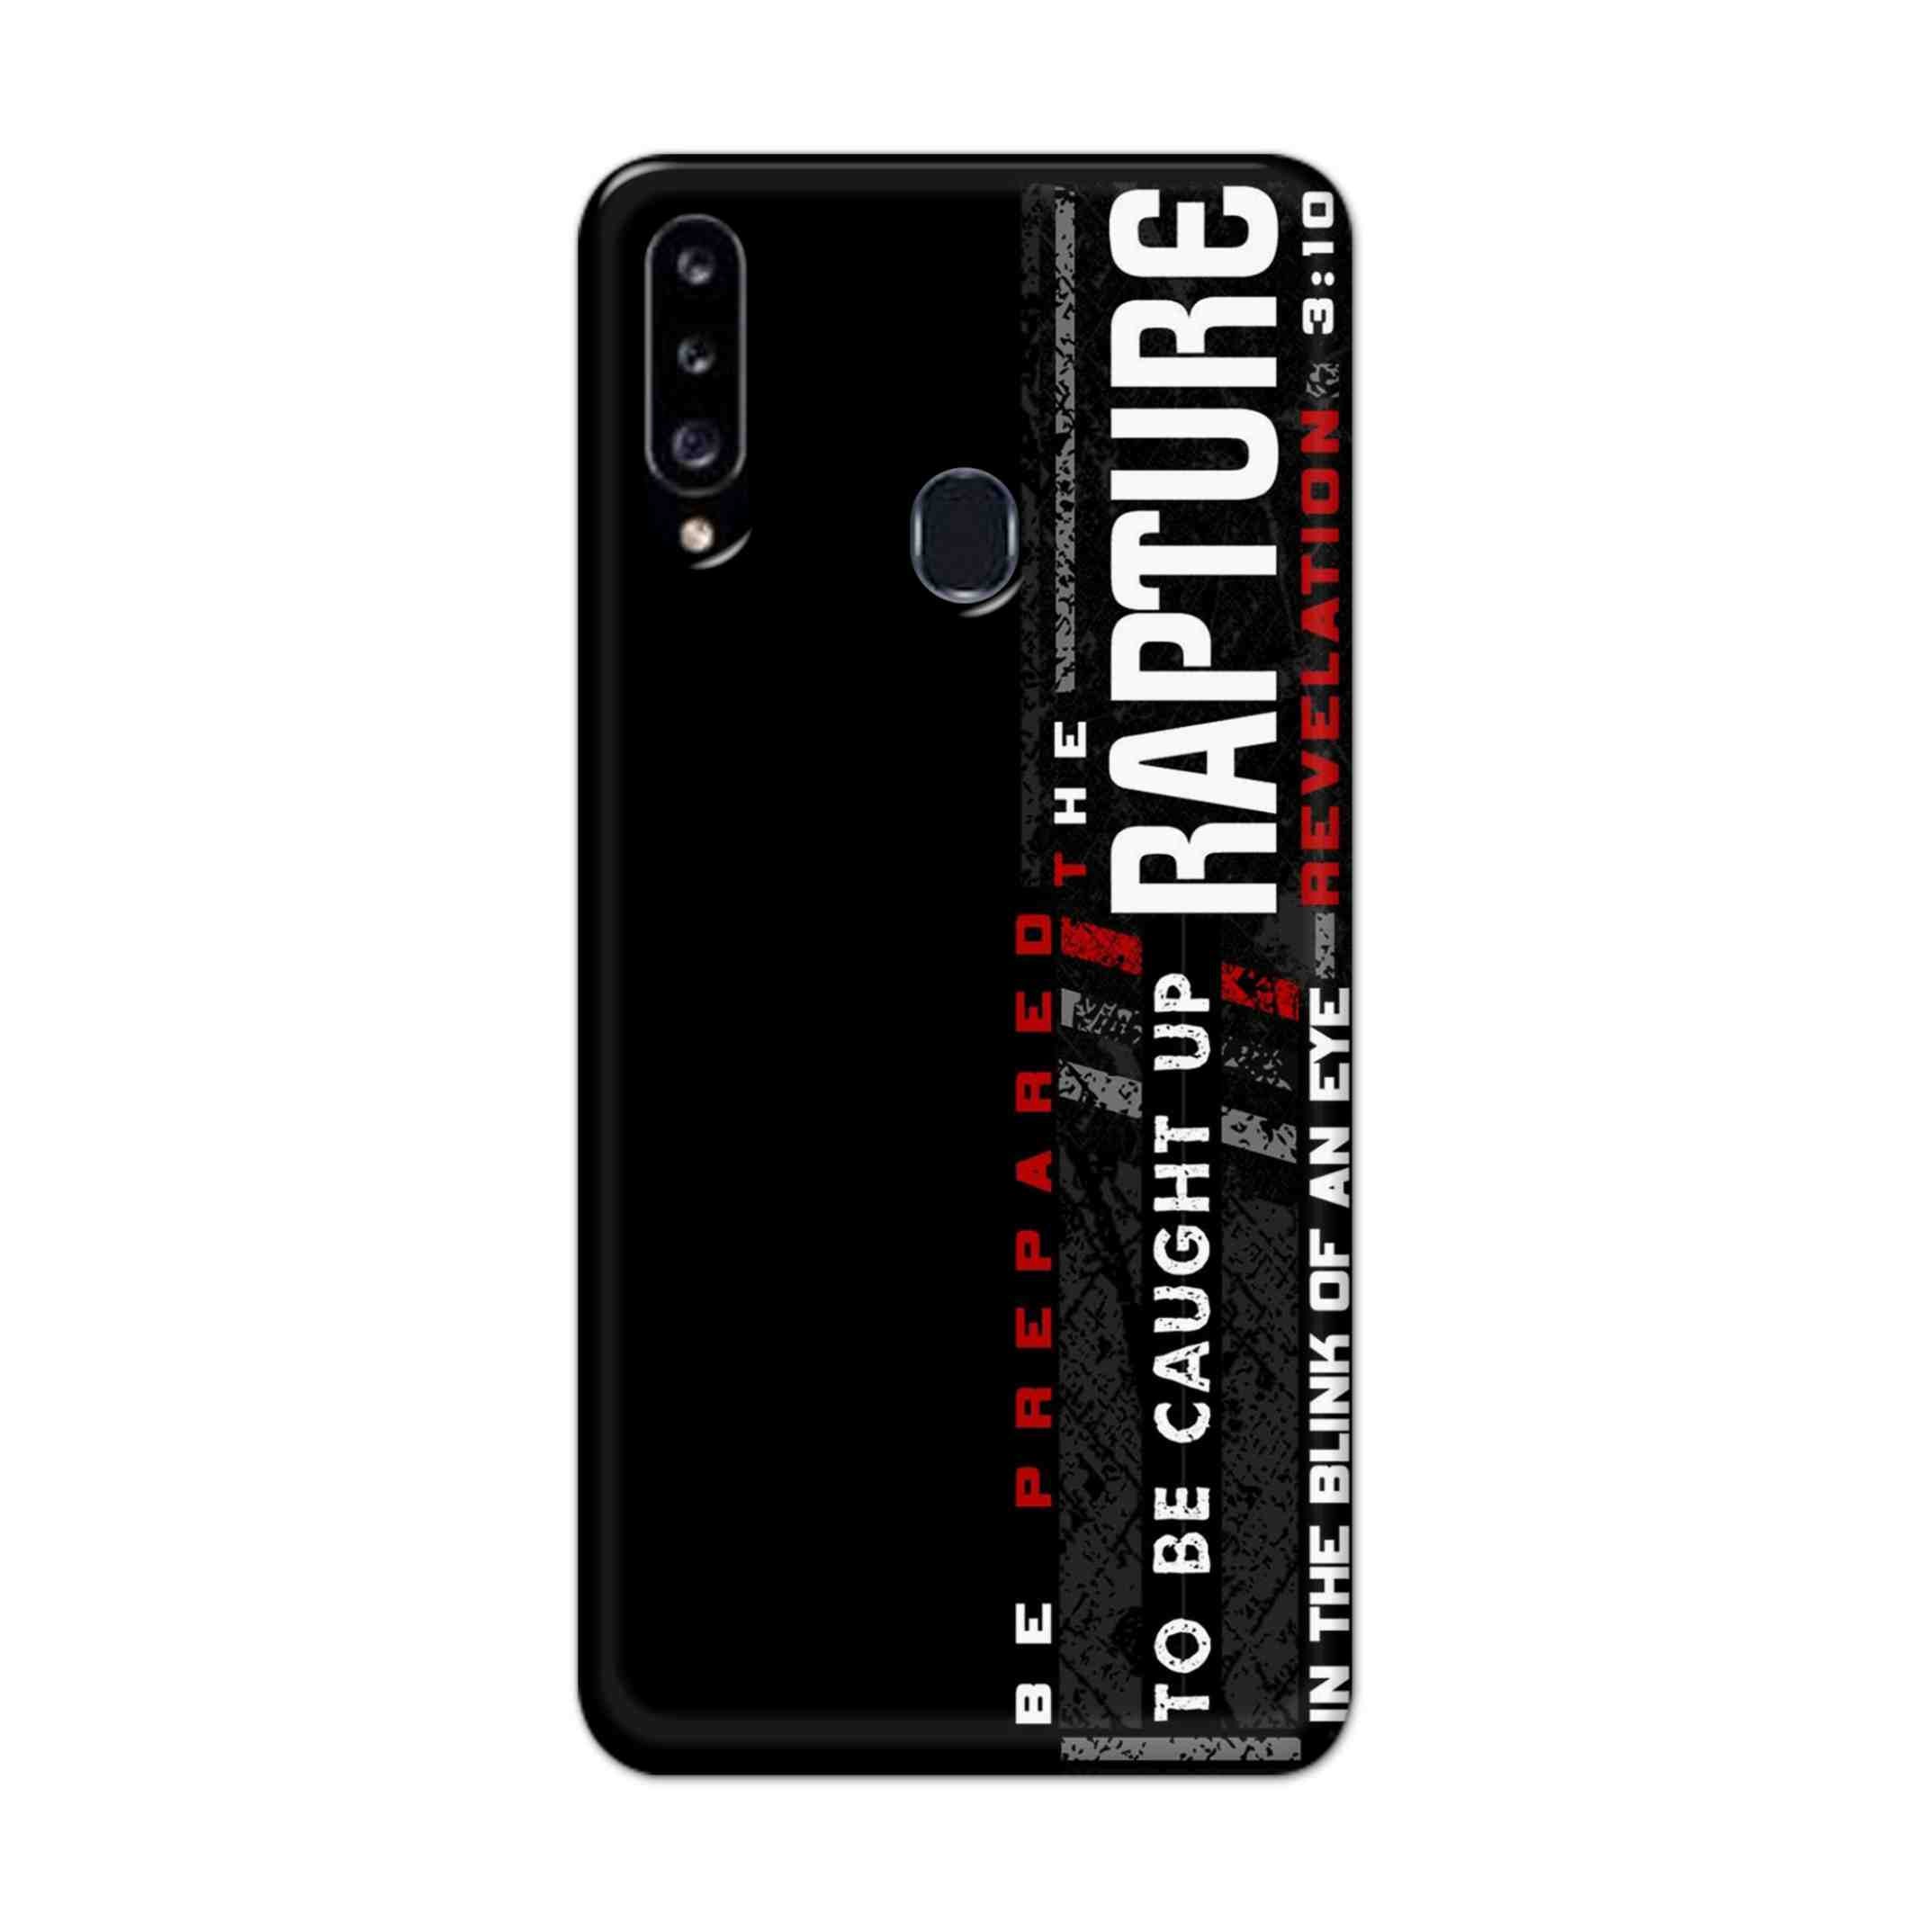 Buy Rapture Hard Back Mobile Phone Case Cover For Samsung Galaxy A21 Online